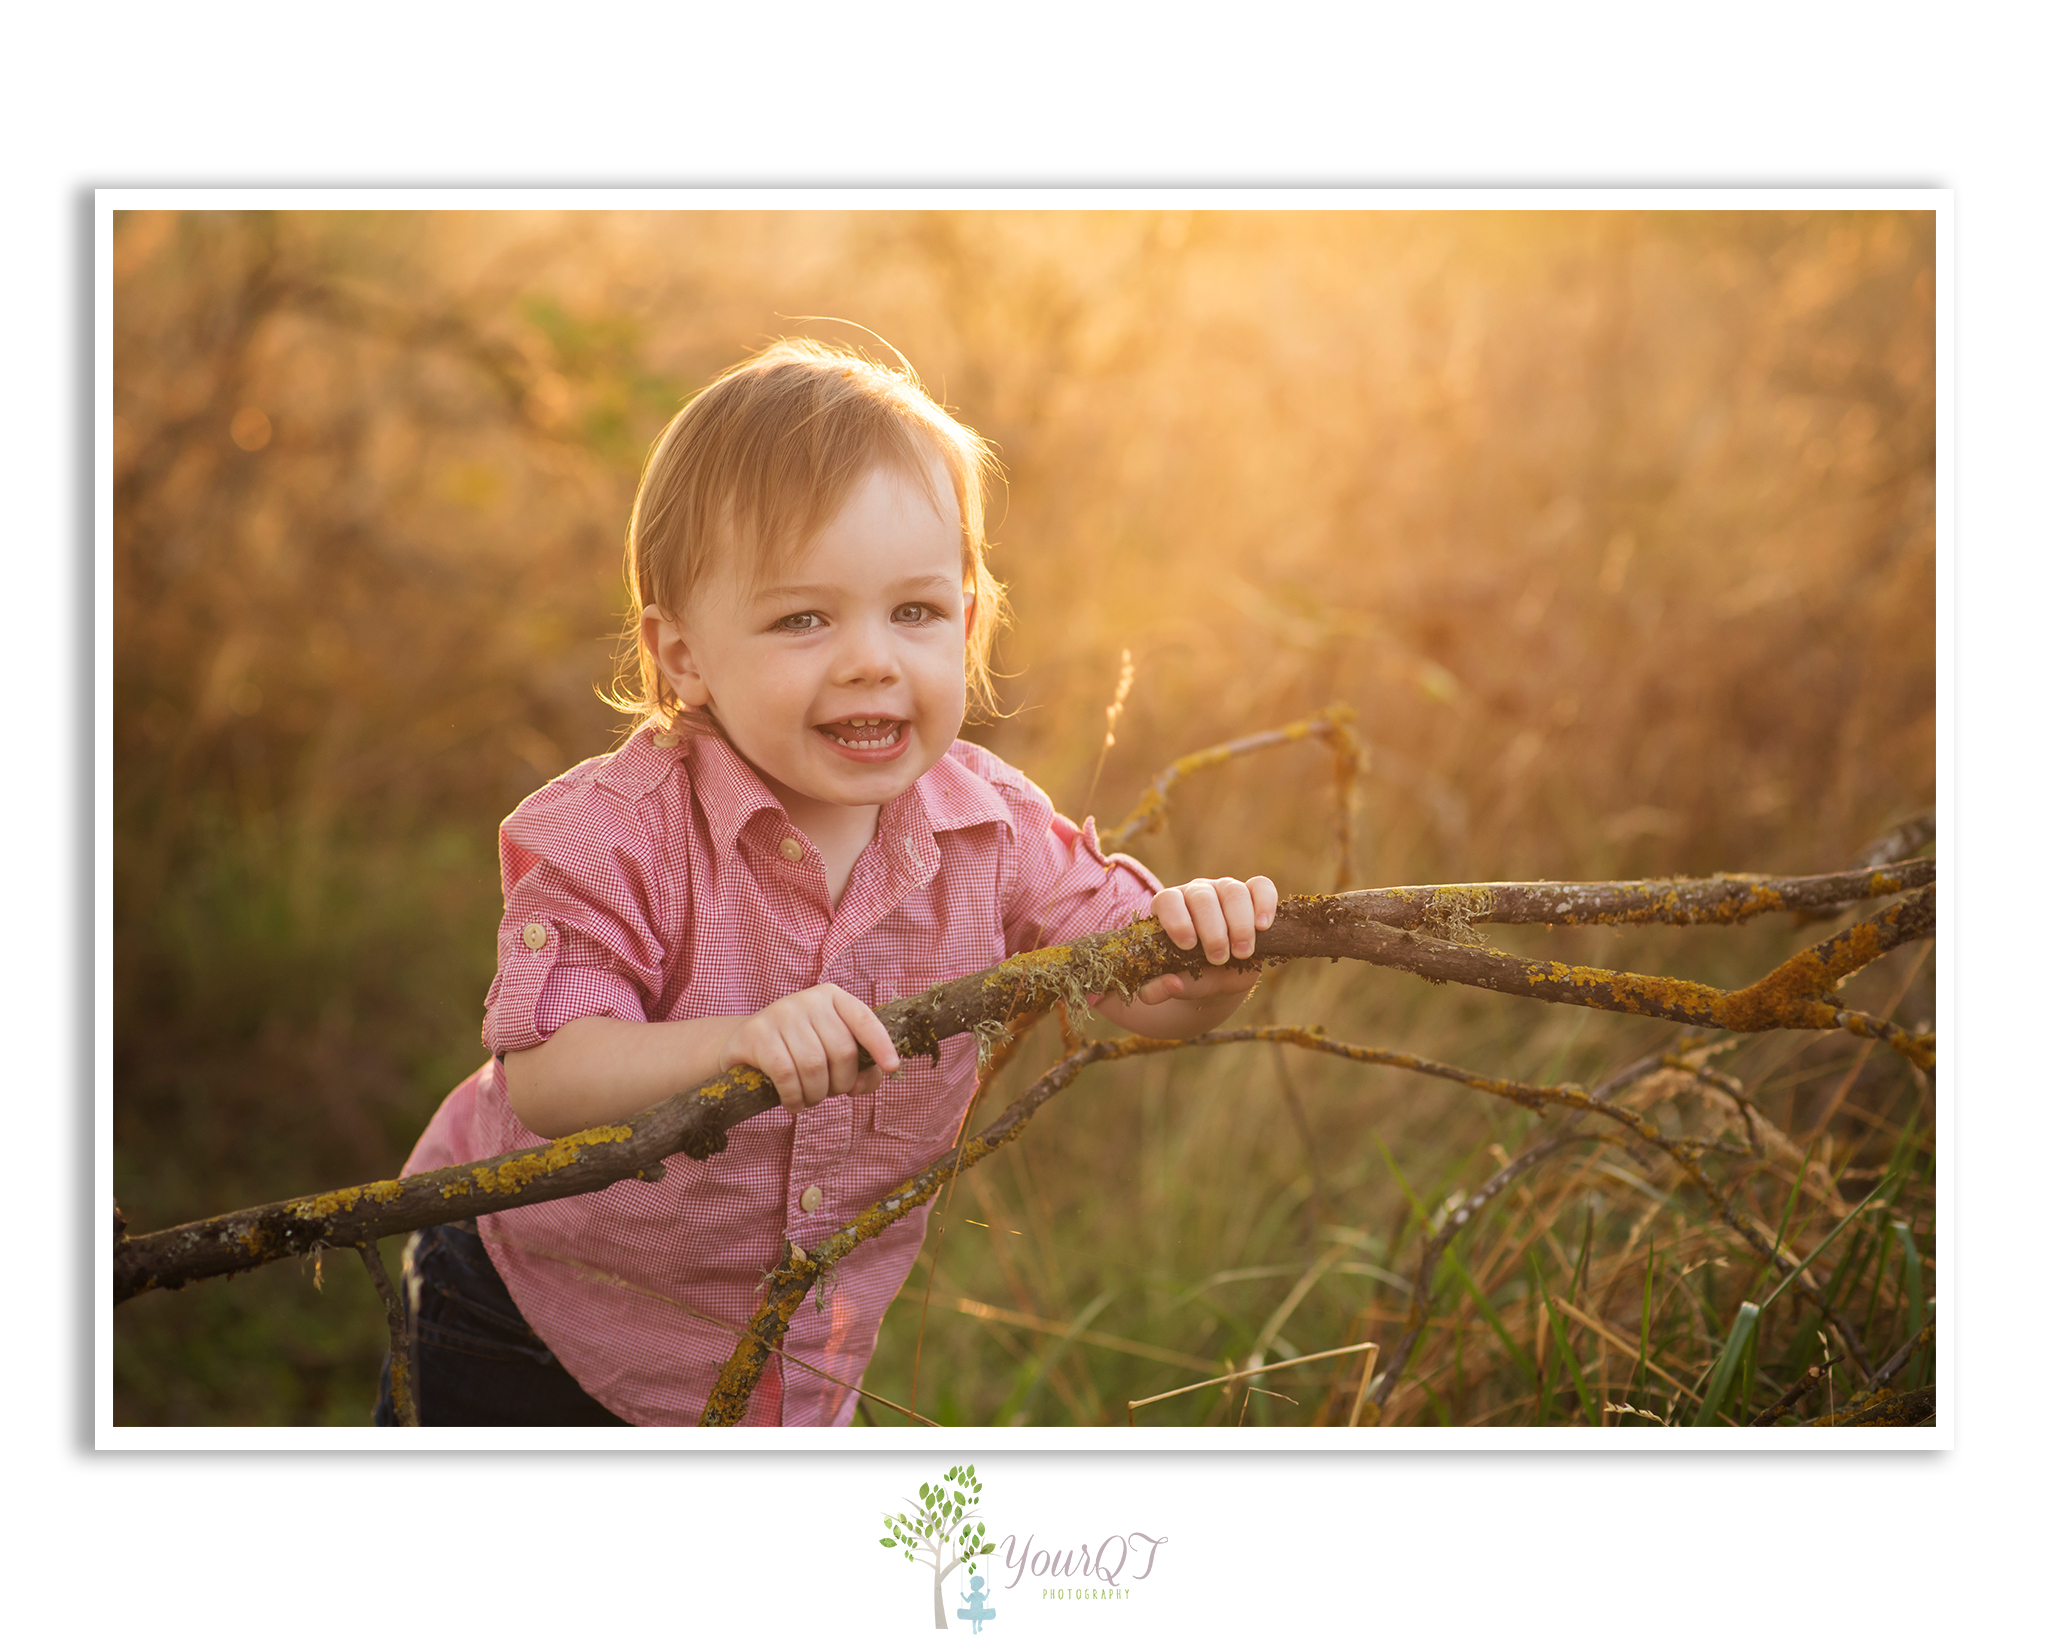 Schultz Family Preview Boy in a field playing with a stick